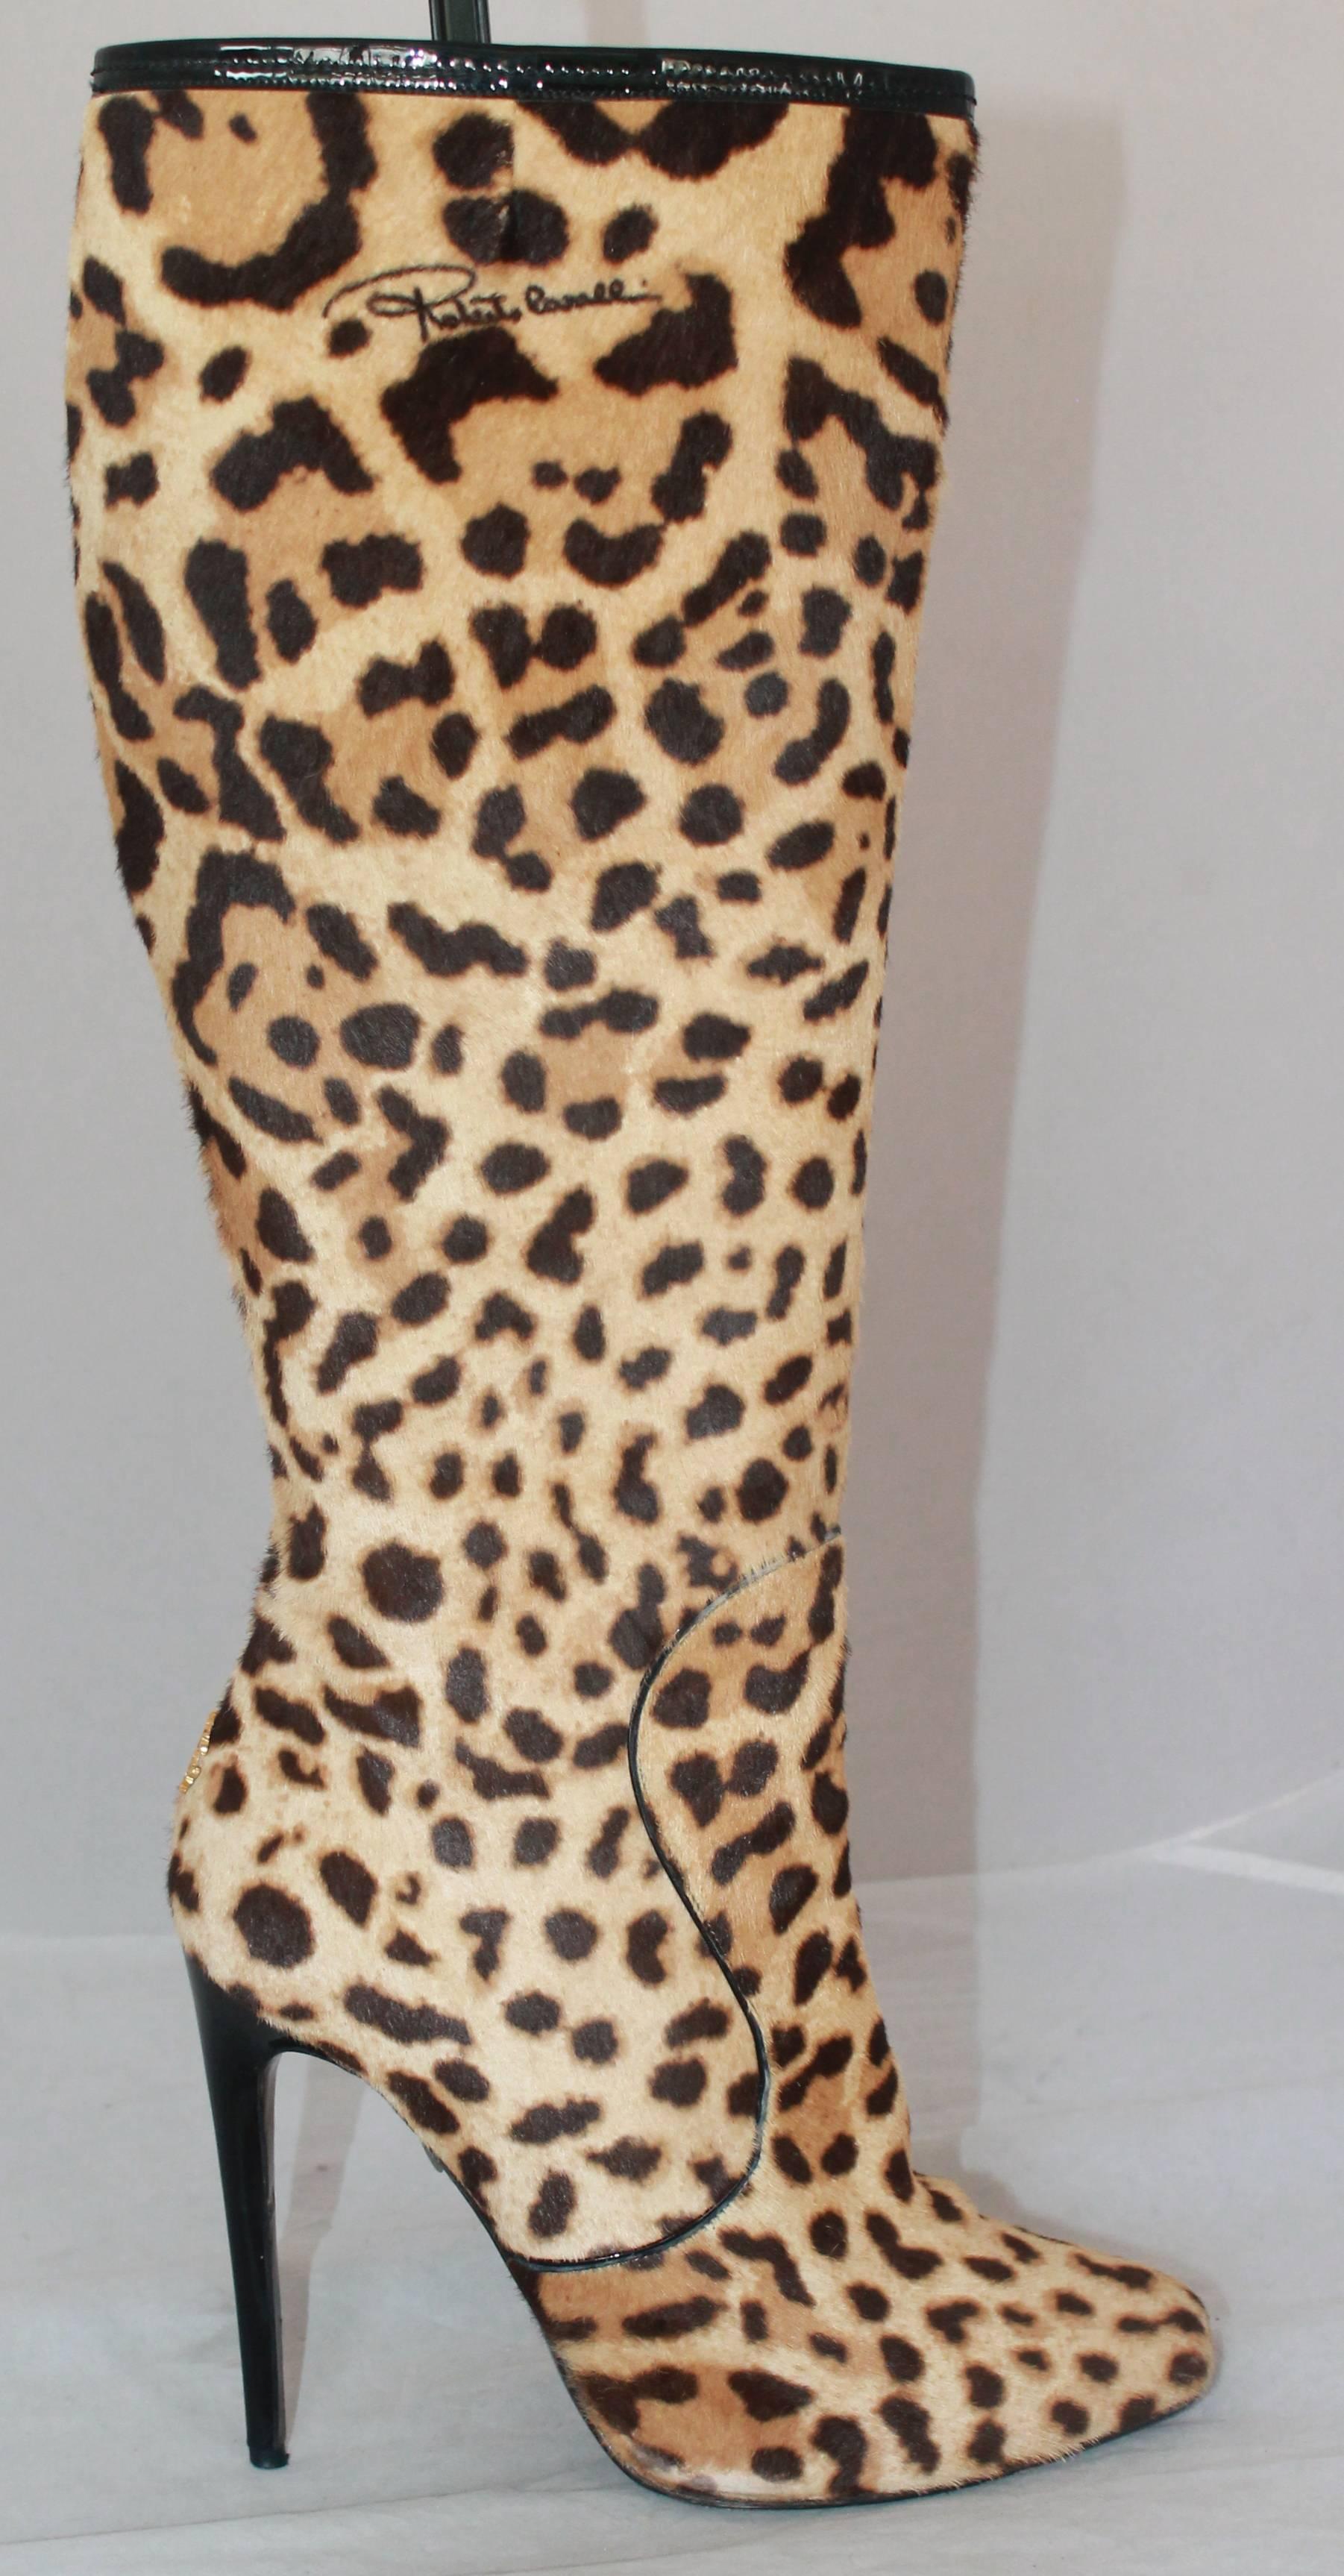 Roberto Cavalli Leopard Print Pony Hair Knee High Stilleto Boots - 40

These boots are in good condition with very noticeable wear on the heels and bottom of boot. They are pony hair with a patent trim around the boot and on the heel.